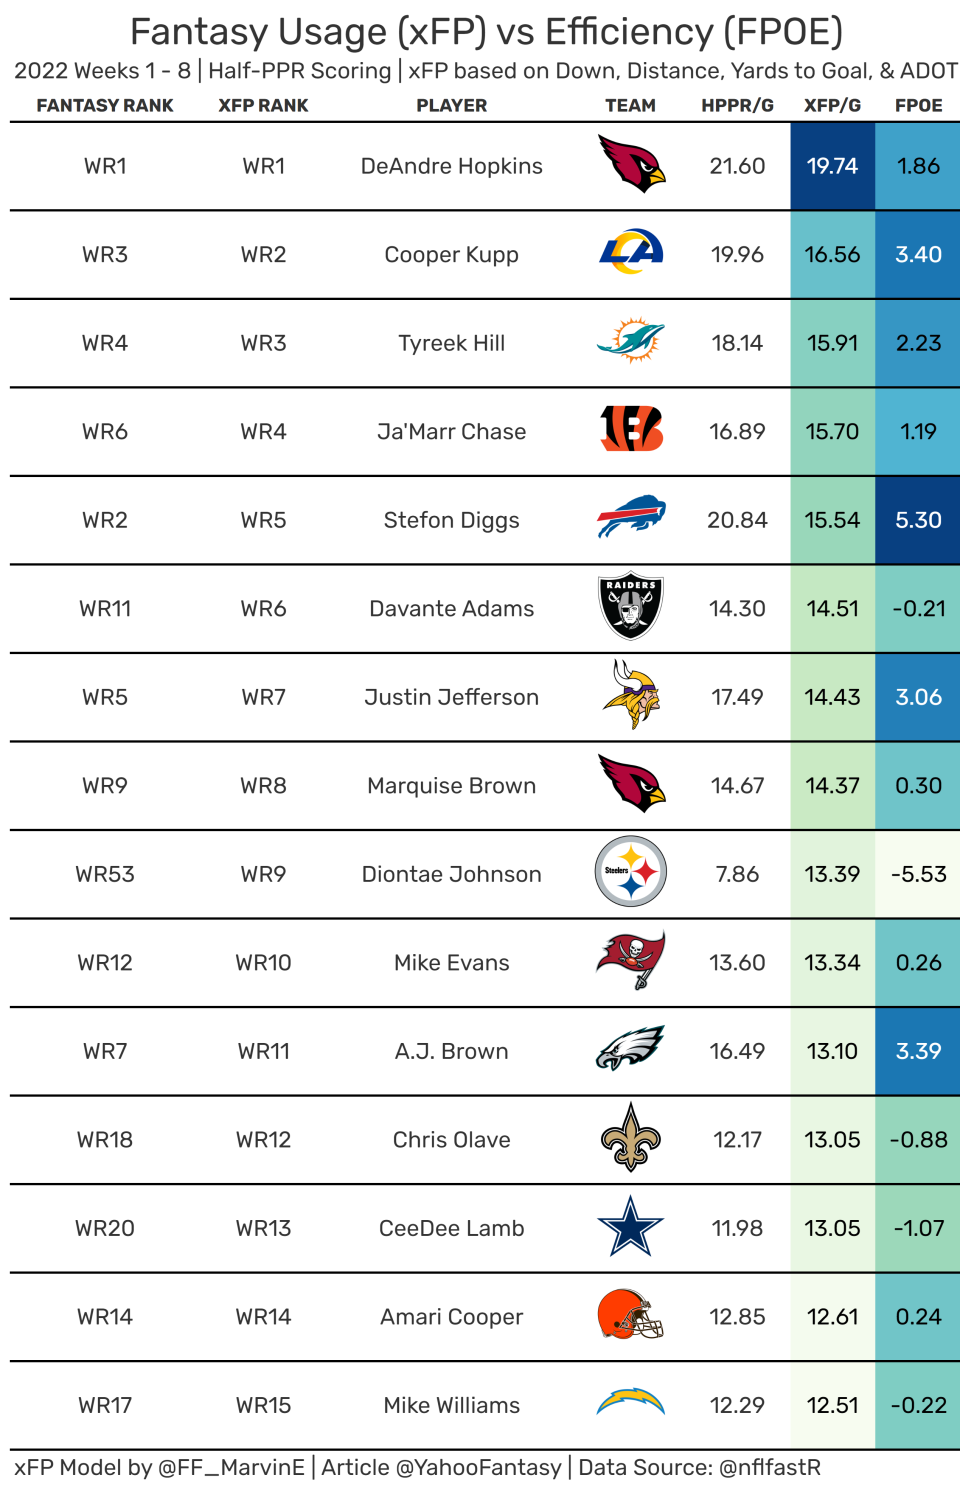 Top-15 Fantasy Wide Receivers from Weeks 1-8. (Data used provided by nflfastR)